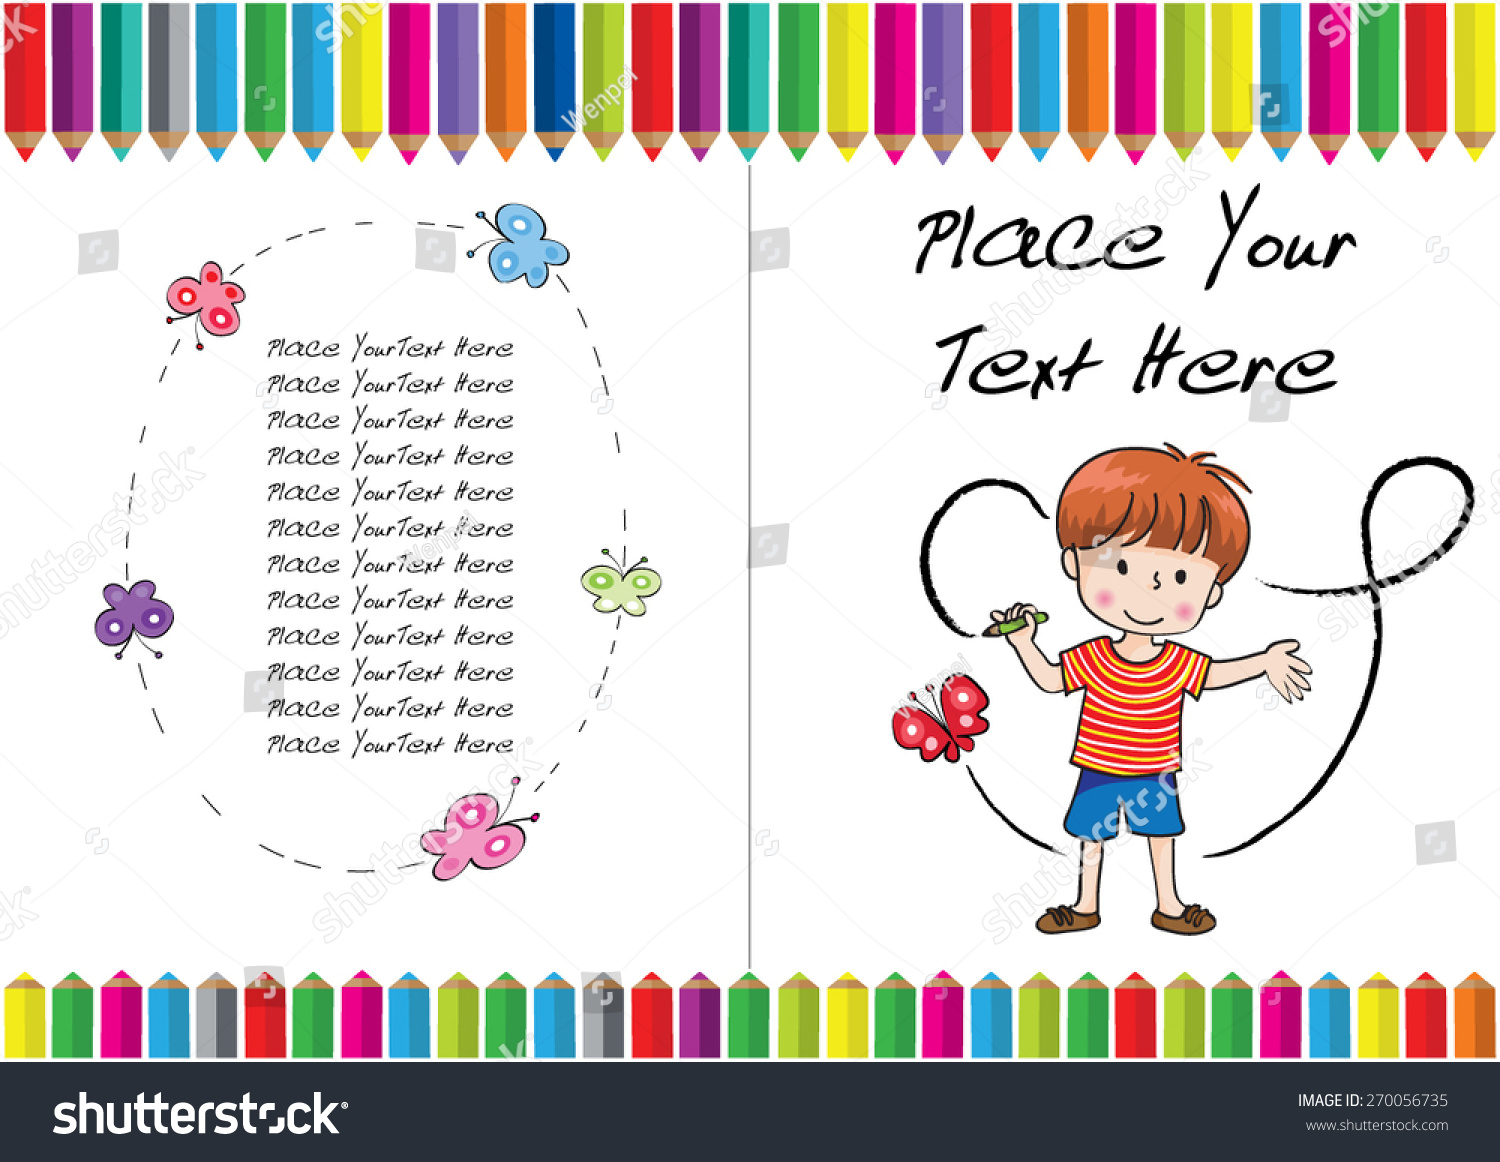 Download Kids Coloring Book Cover Design Stock Vector Royalty Free 270056735